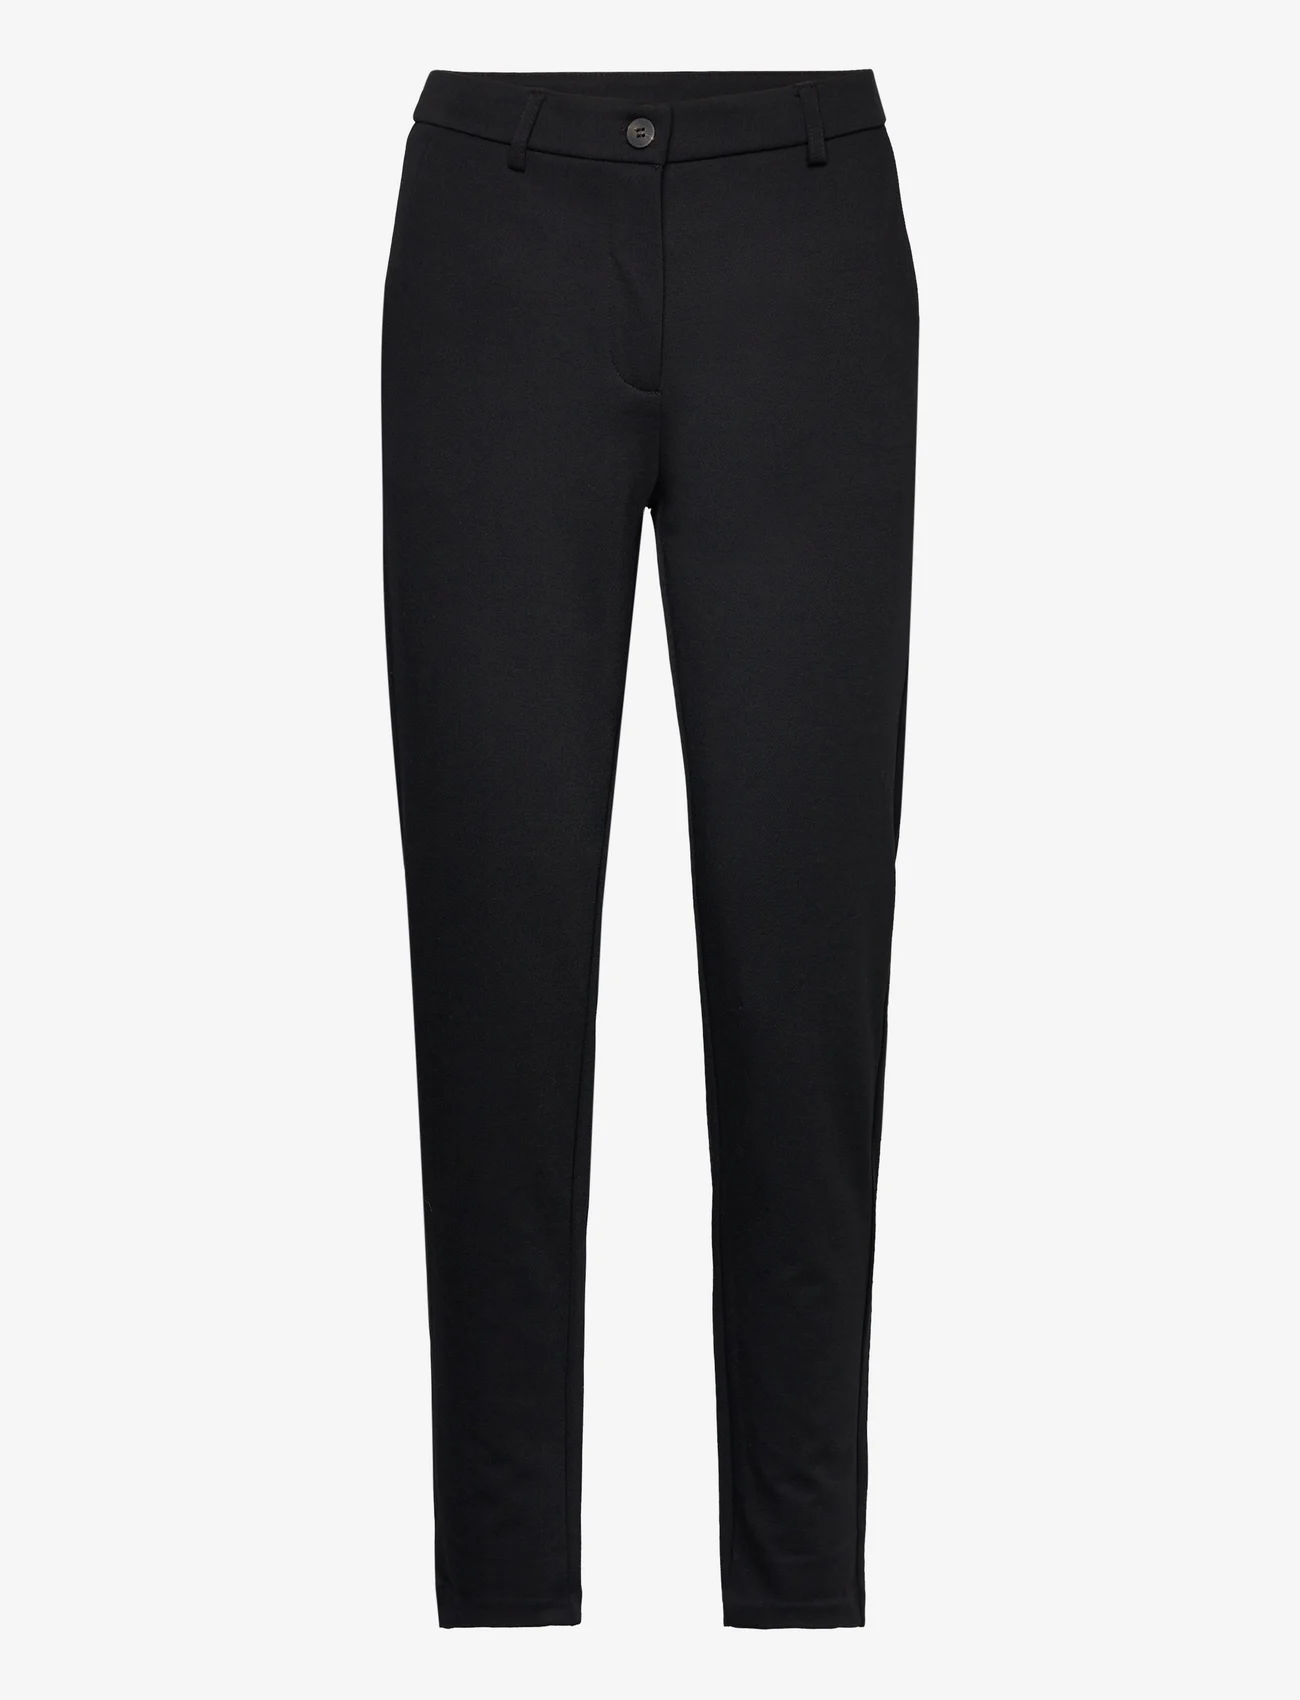 FREE/QUENT - FQNANNI-PANT - tailored trousers - black - 0